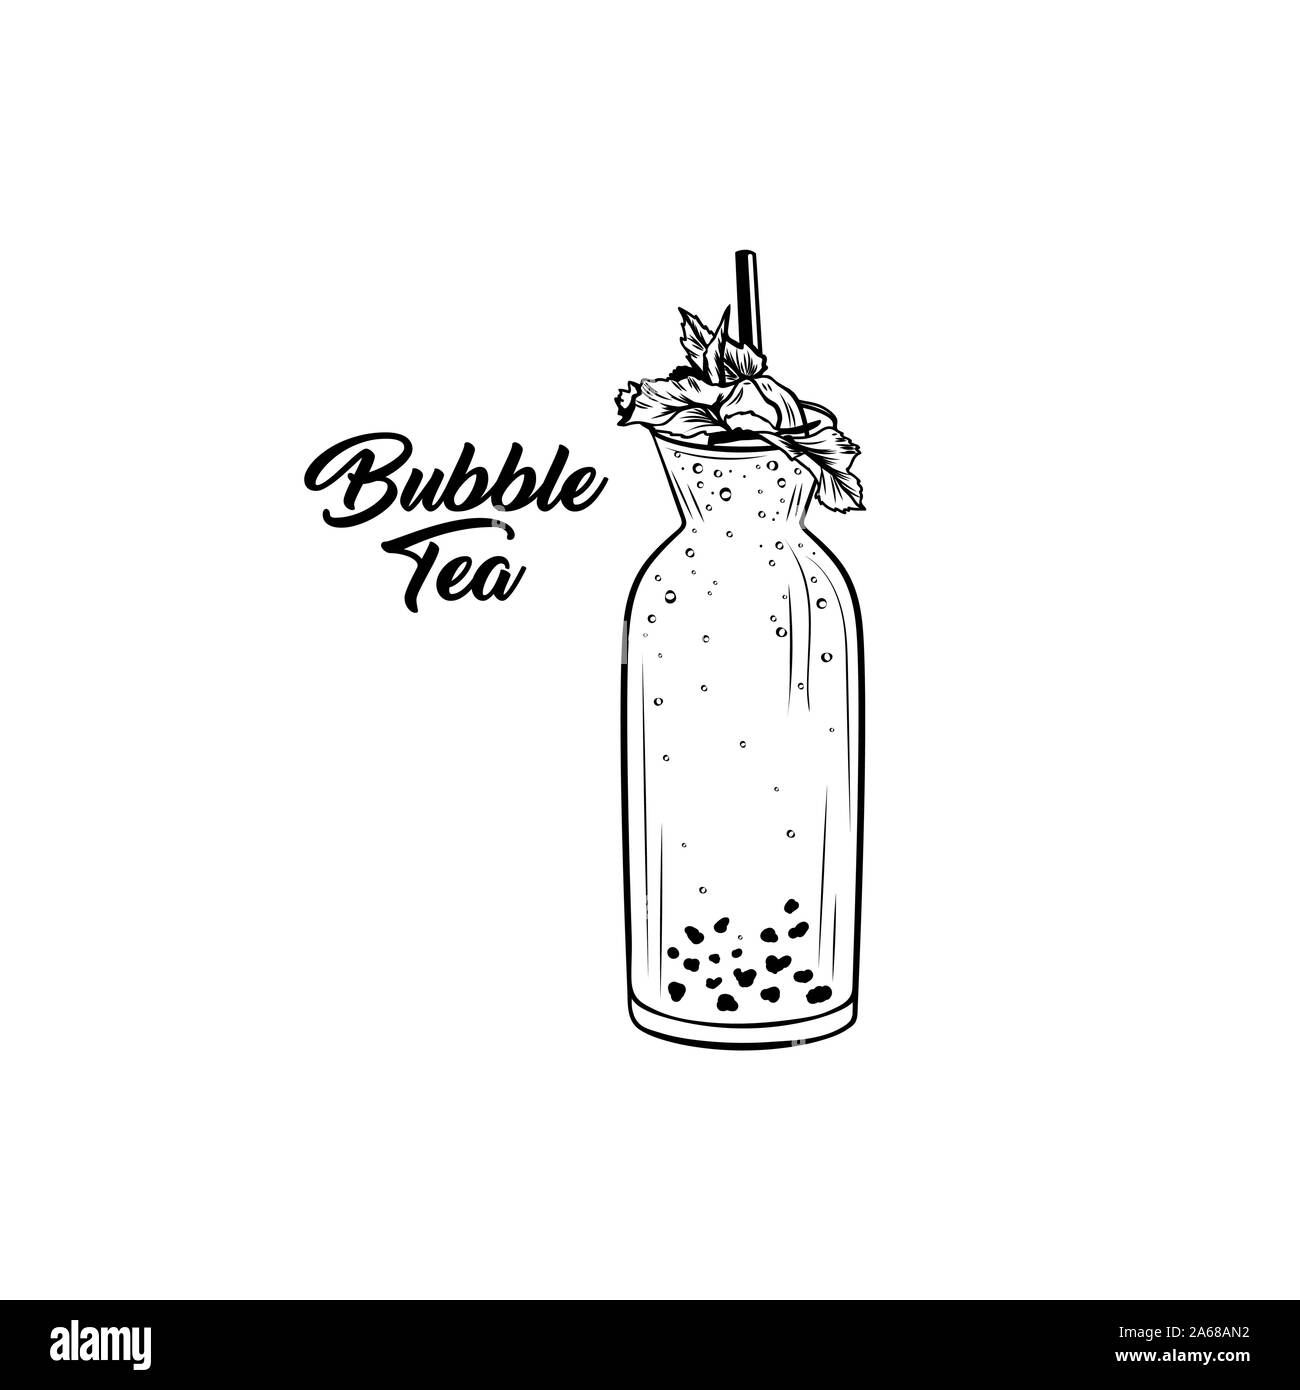 Bubble tea hand drawn black ink illustration. Pearl milk tea with fresh herbs decor in glass bottle outline.Taiwanese cocktail with chewy tapioca balls sketch with lettering. Cafe menu design element Stock Vector